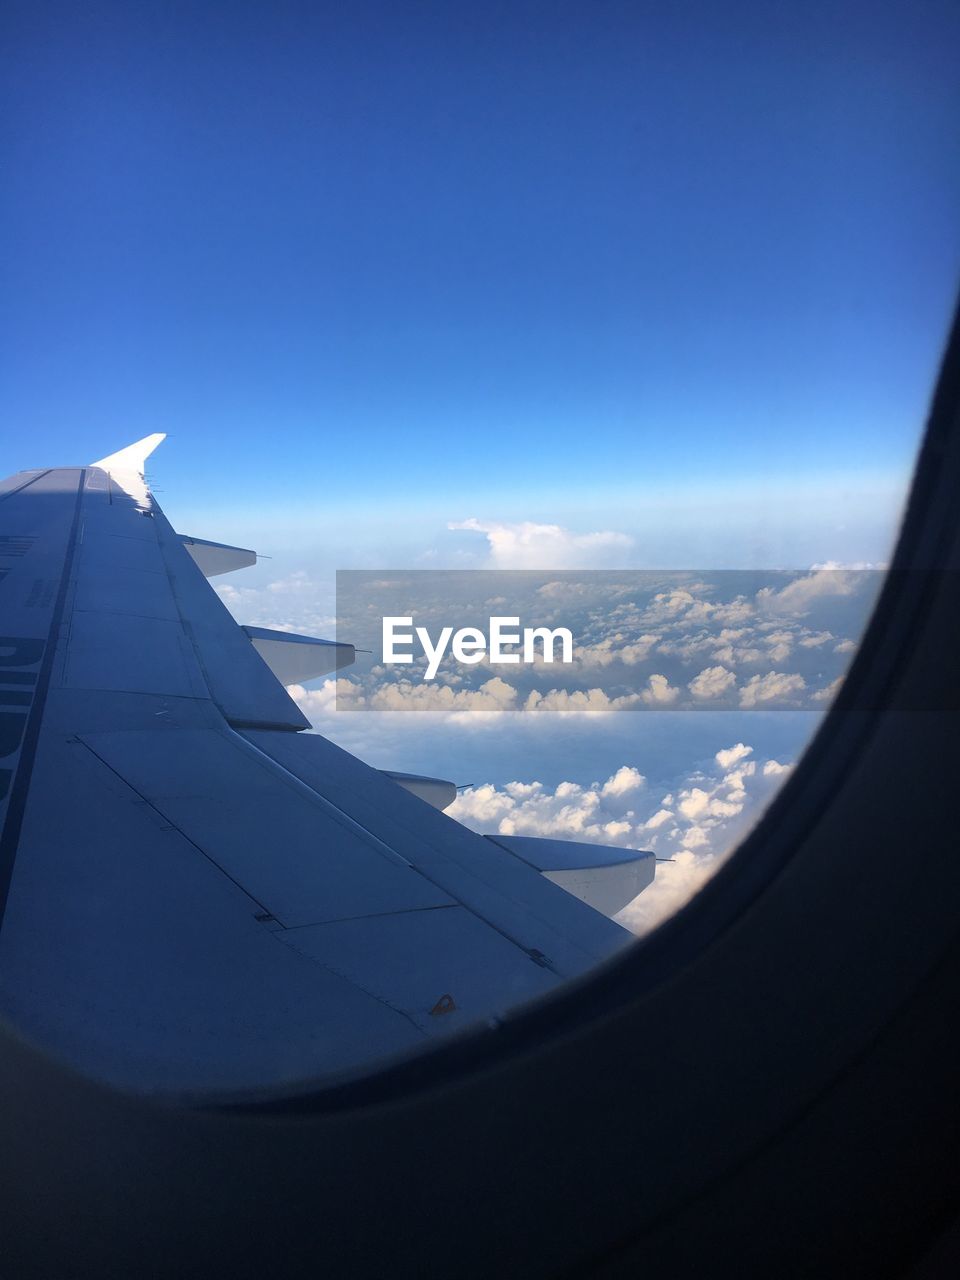 Cropped image of airplane flying against clear blue sky seen through window